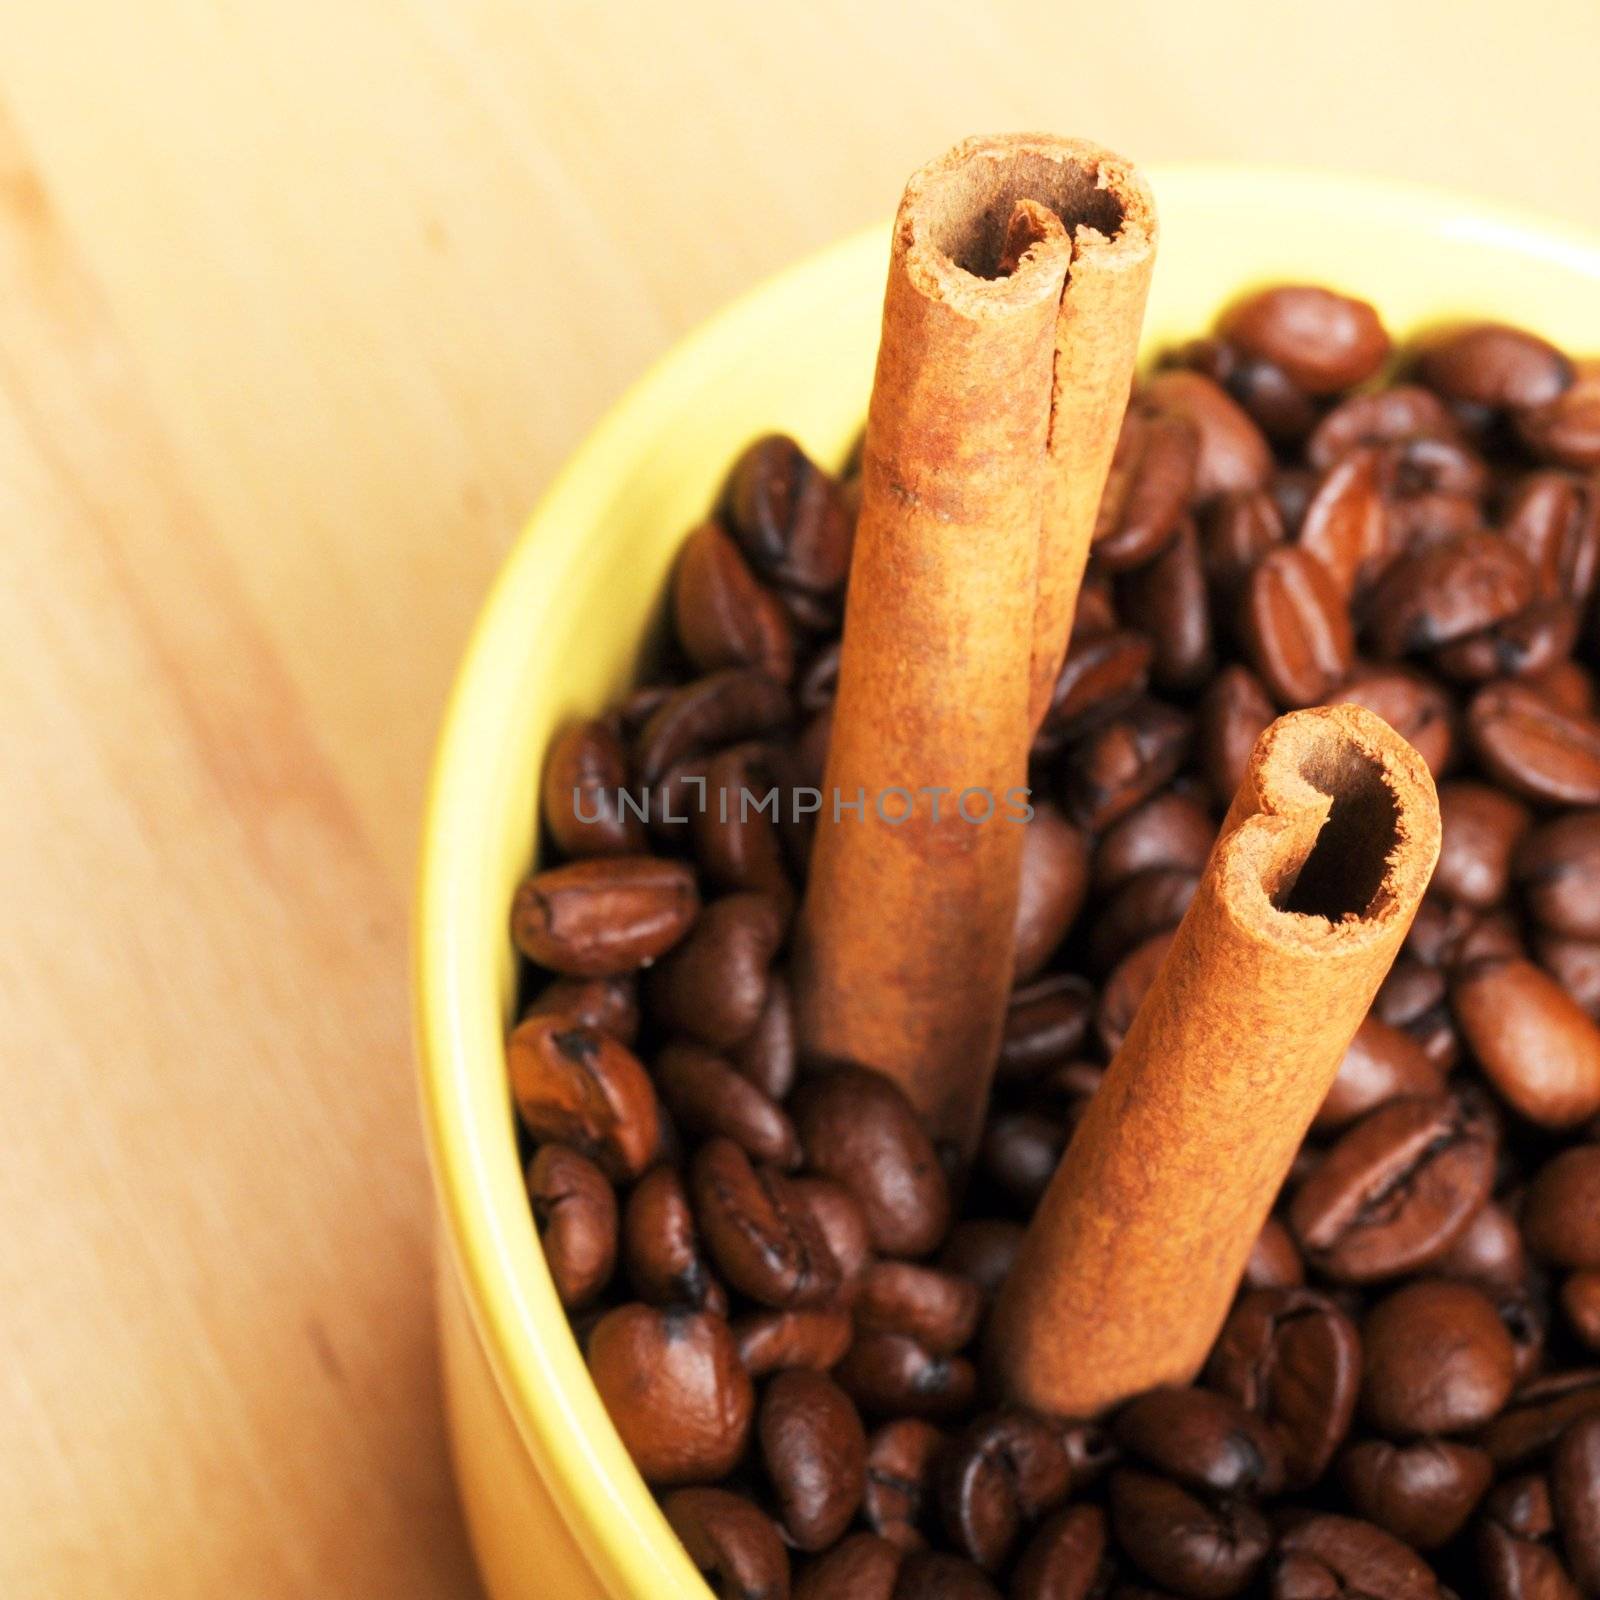 cinnamon and coffee showing food concept with copyspace